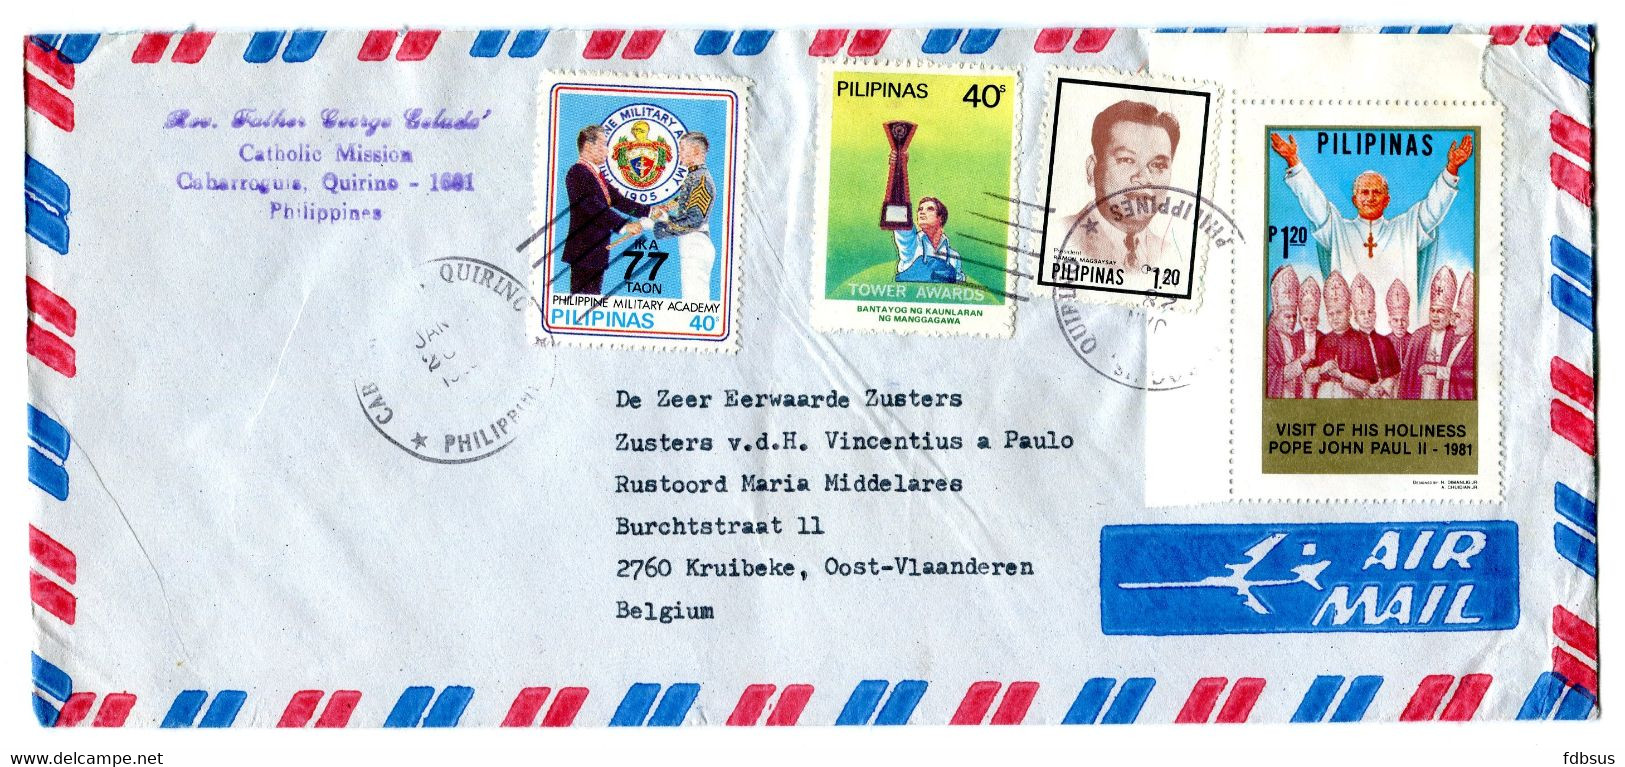 1983 Airmal Envelope From Rev. Father Geladé, Cabarroguis Quirino Cath. Mission To Kruibeke Belgium - 4 Stamps On Cover - Philippines